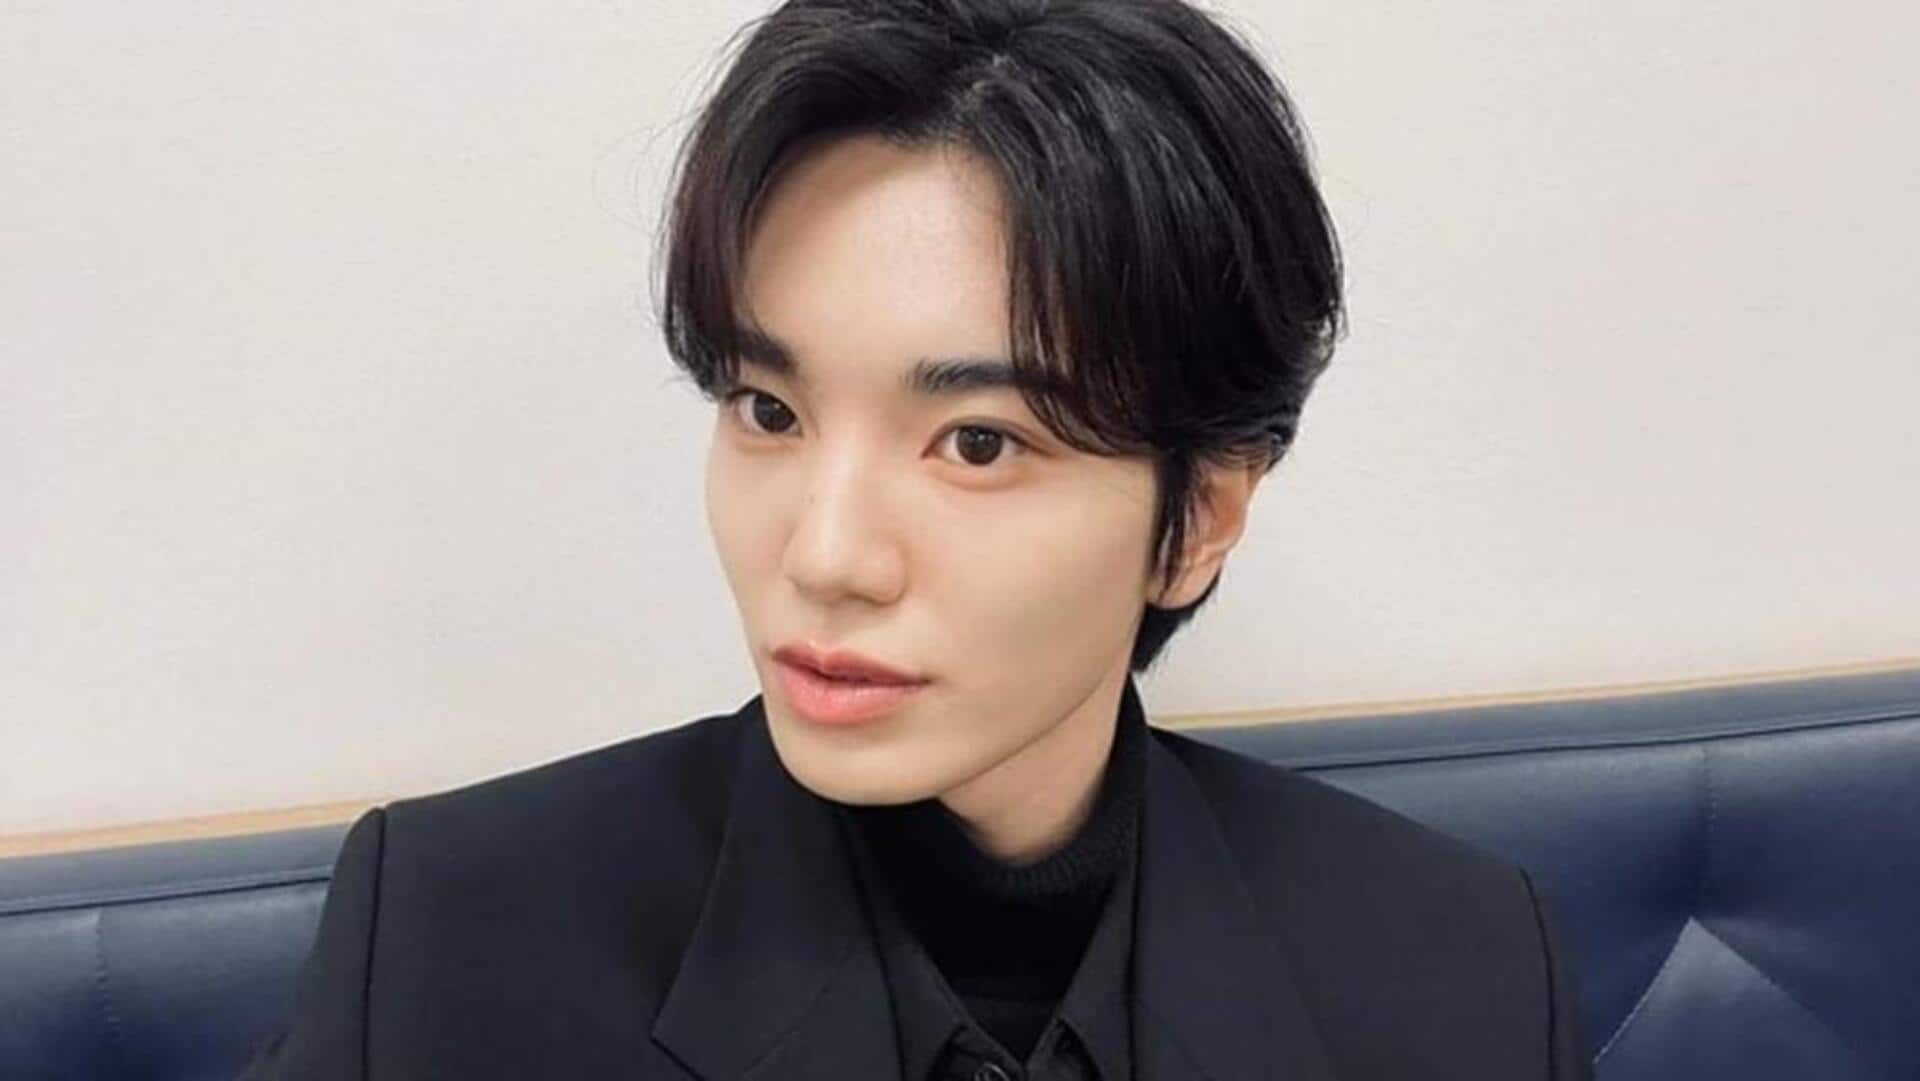 INFINITE's Sungjong seeks contract termination with SPK Entertainment